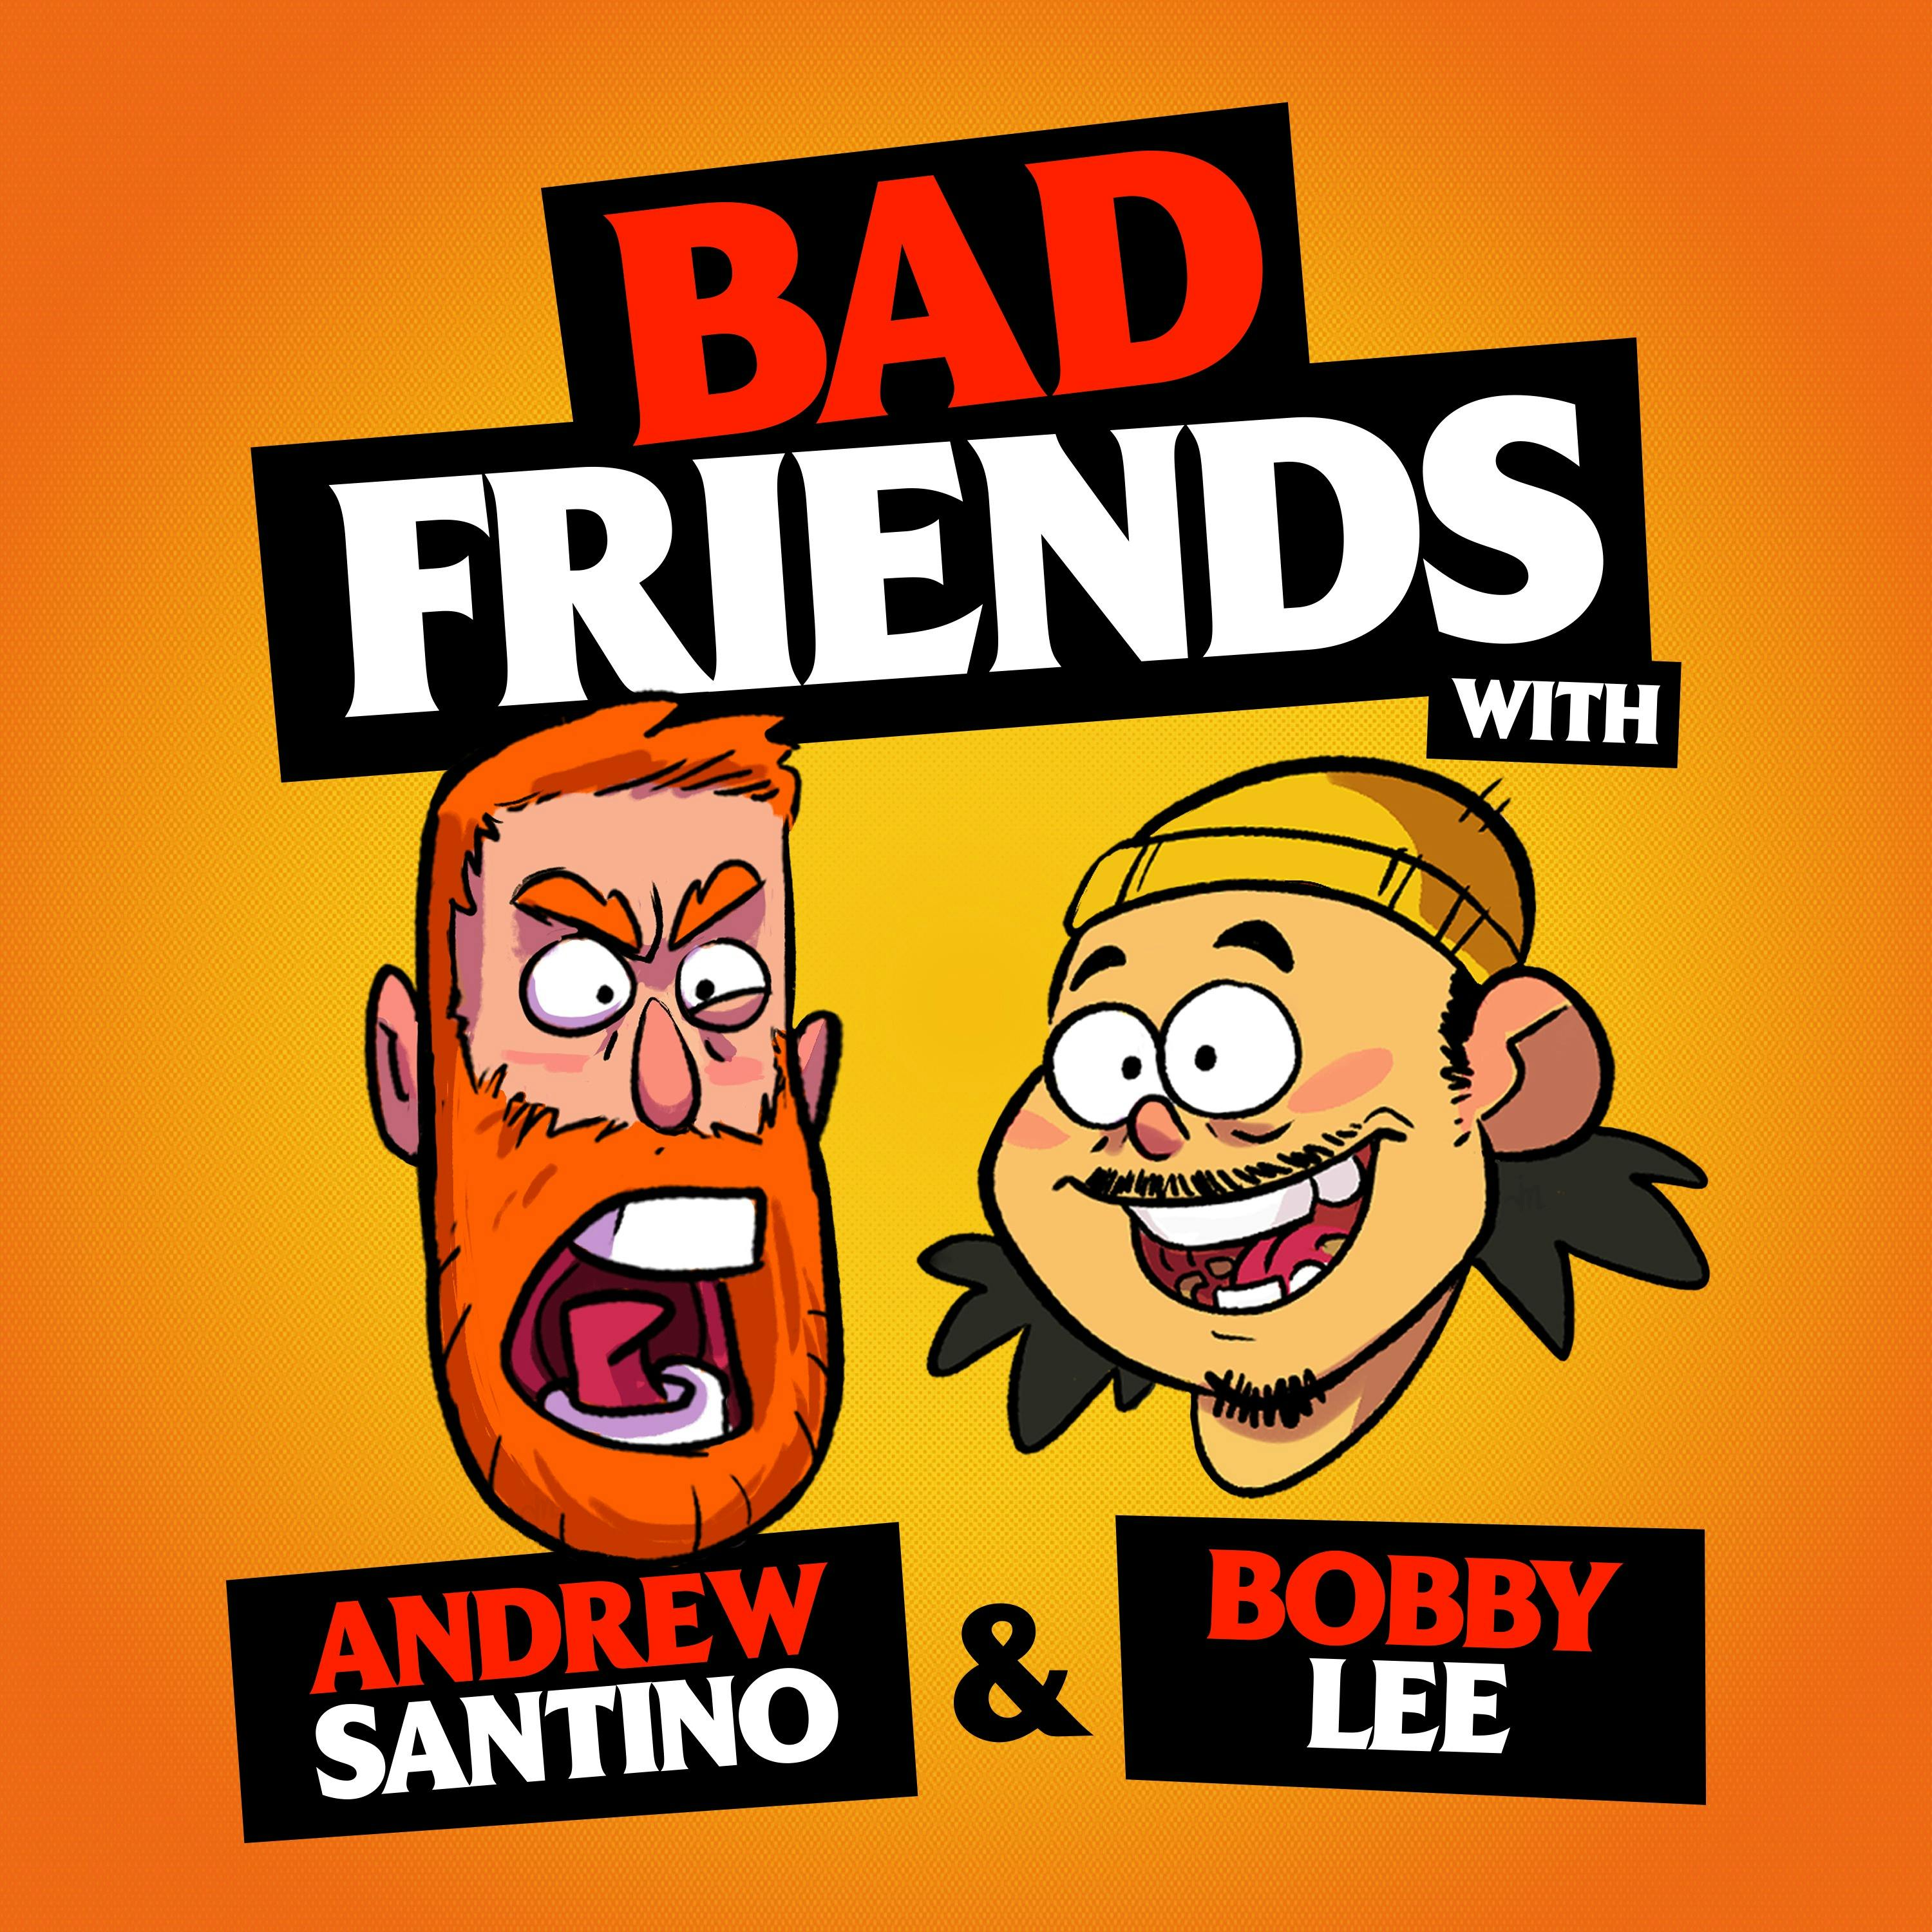 Bad Friends by Andrew Santino and Bobby Lee